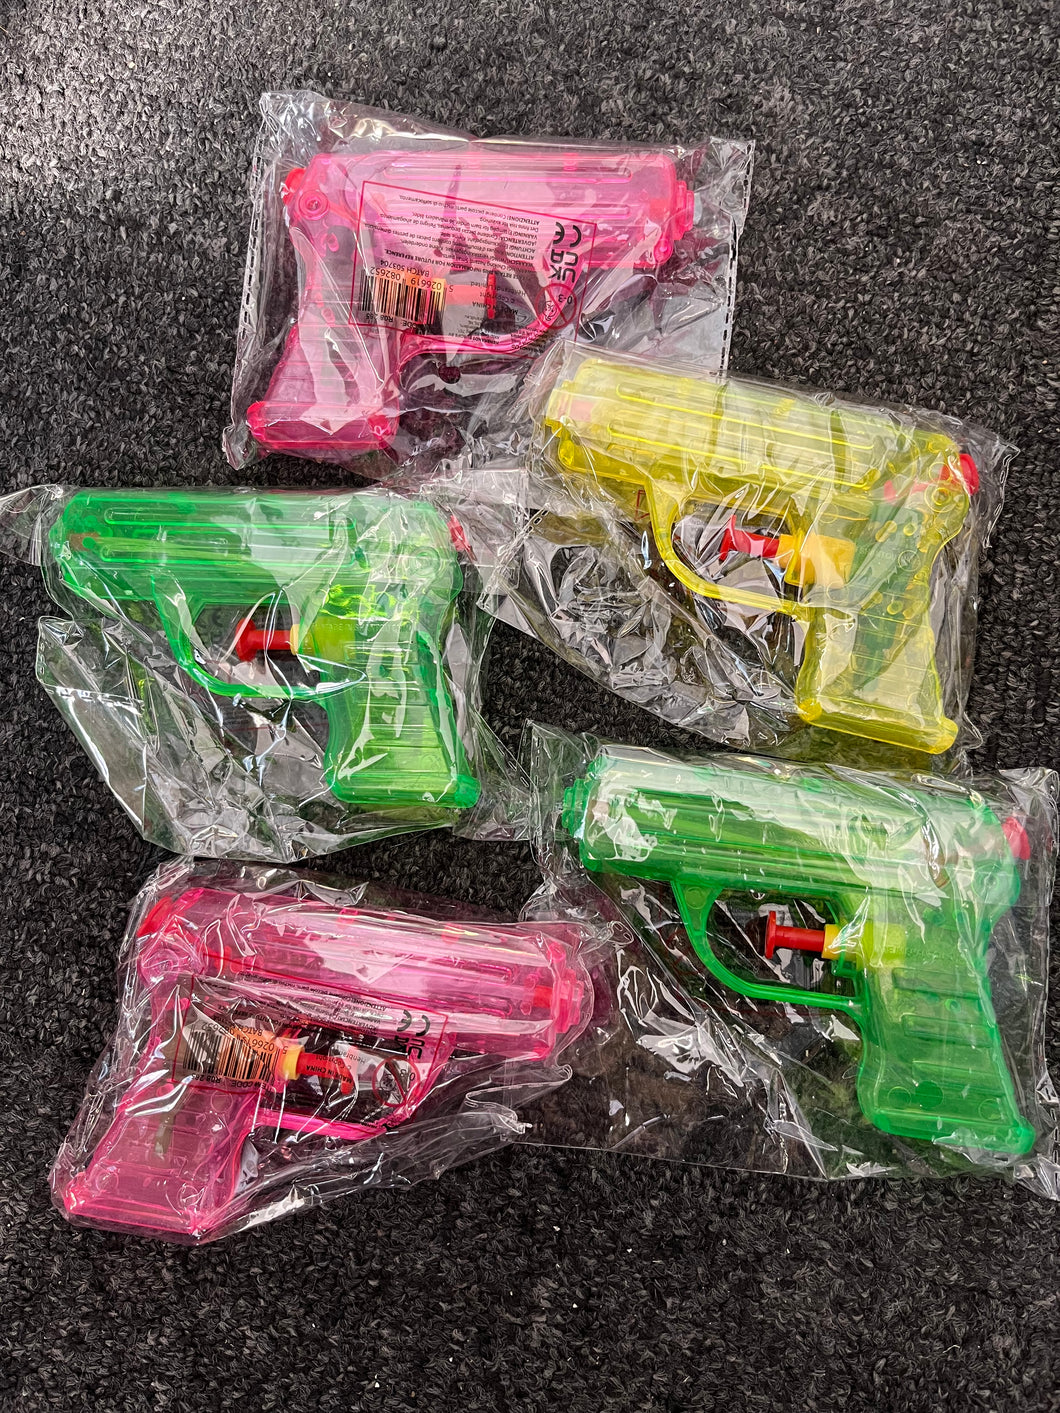 Bundle of 5 Mini Water Guns - Great for party bags